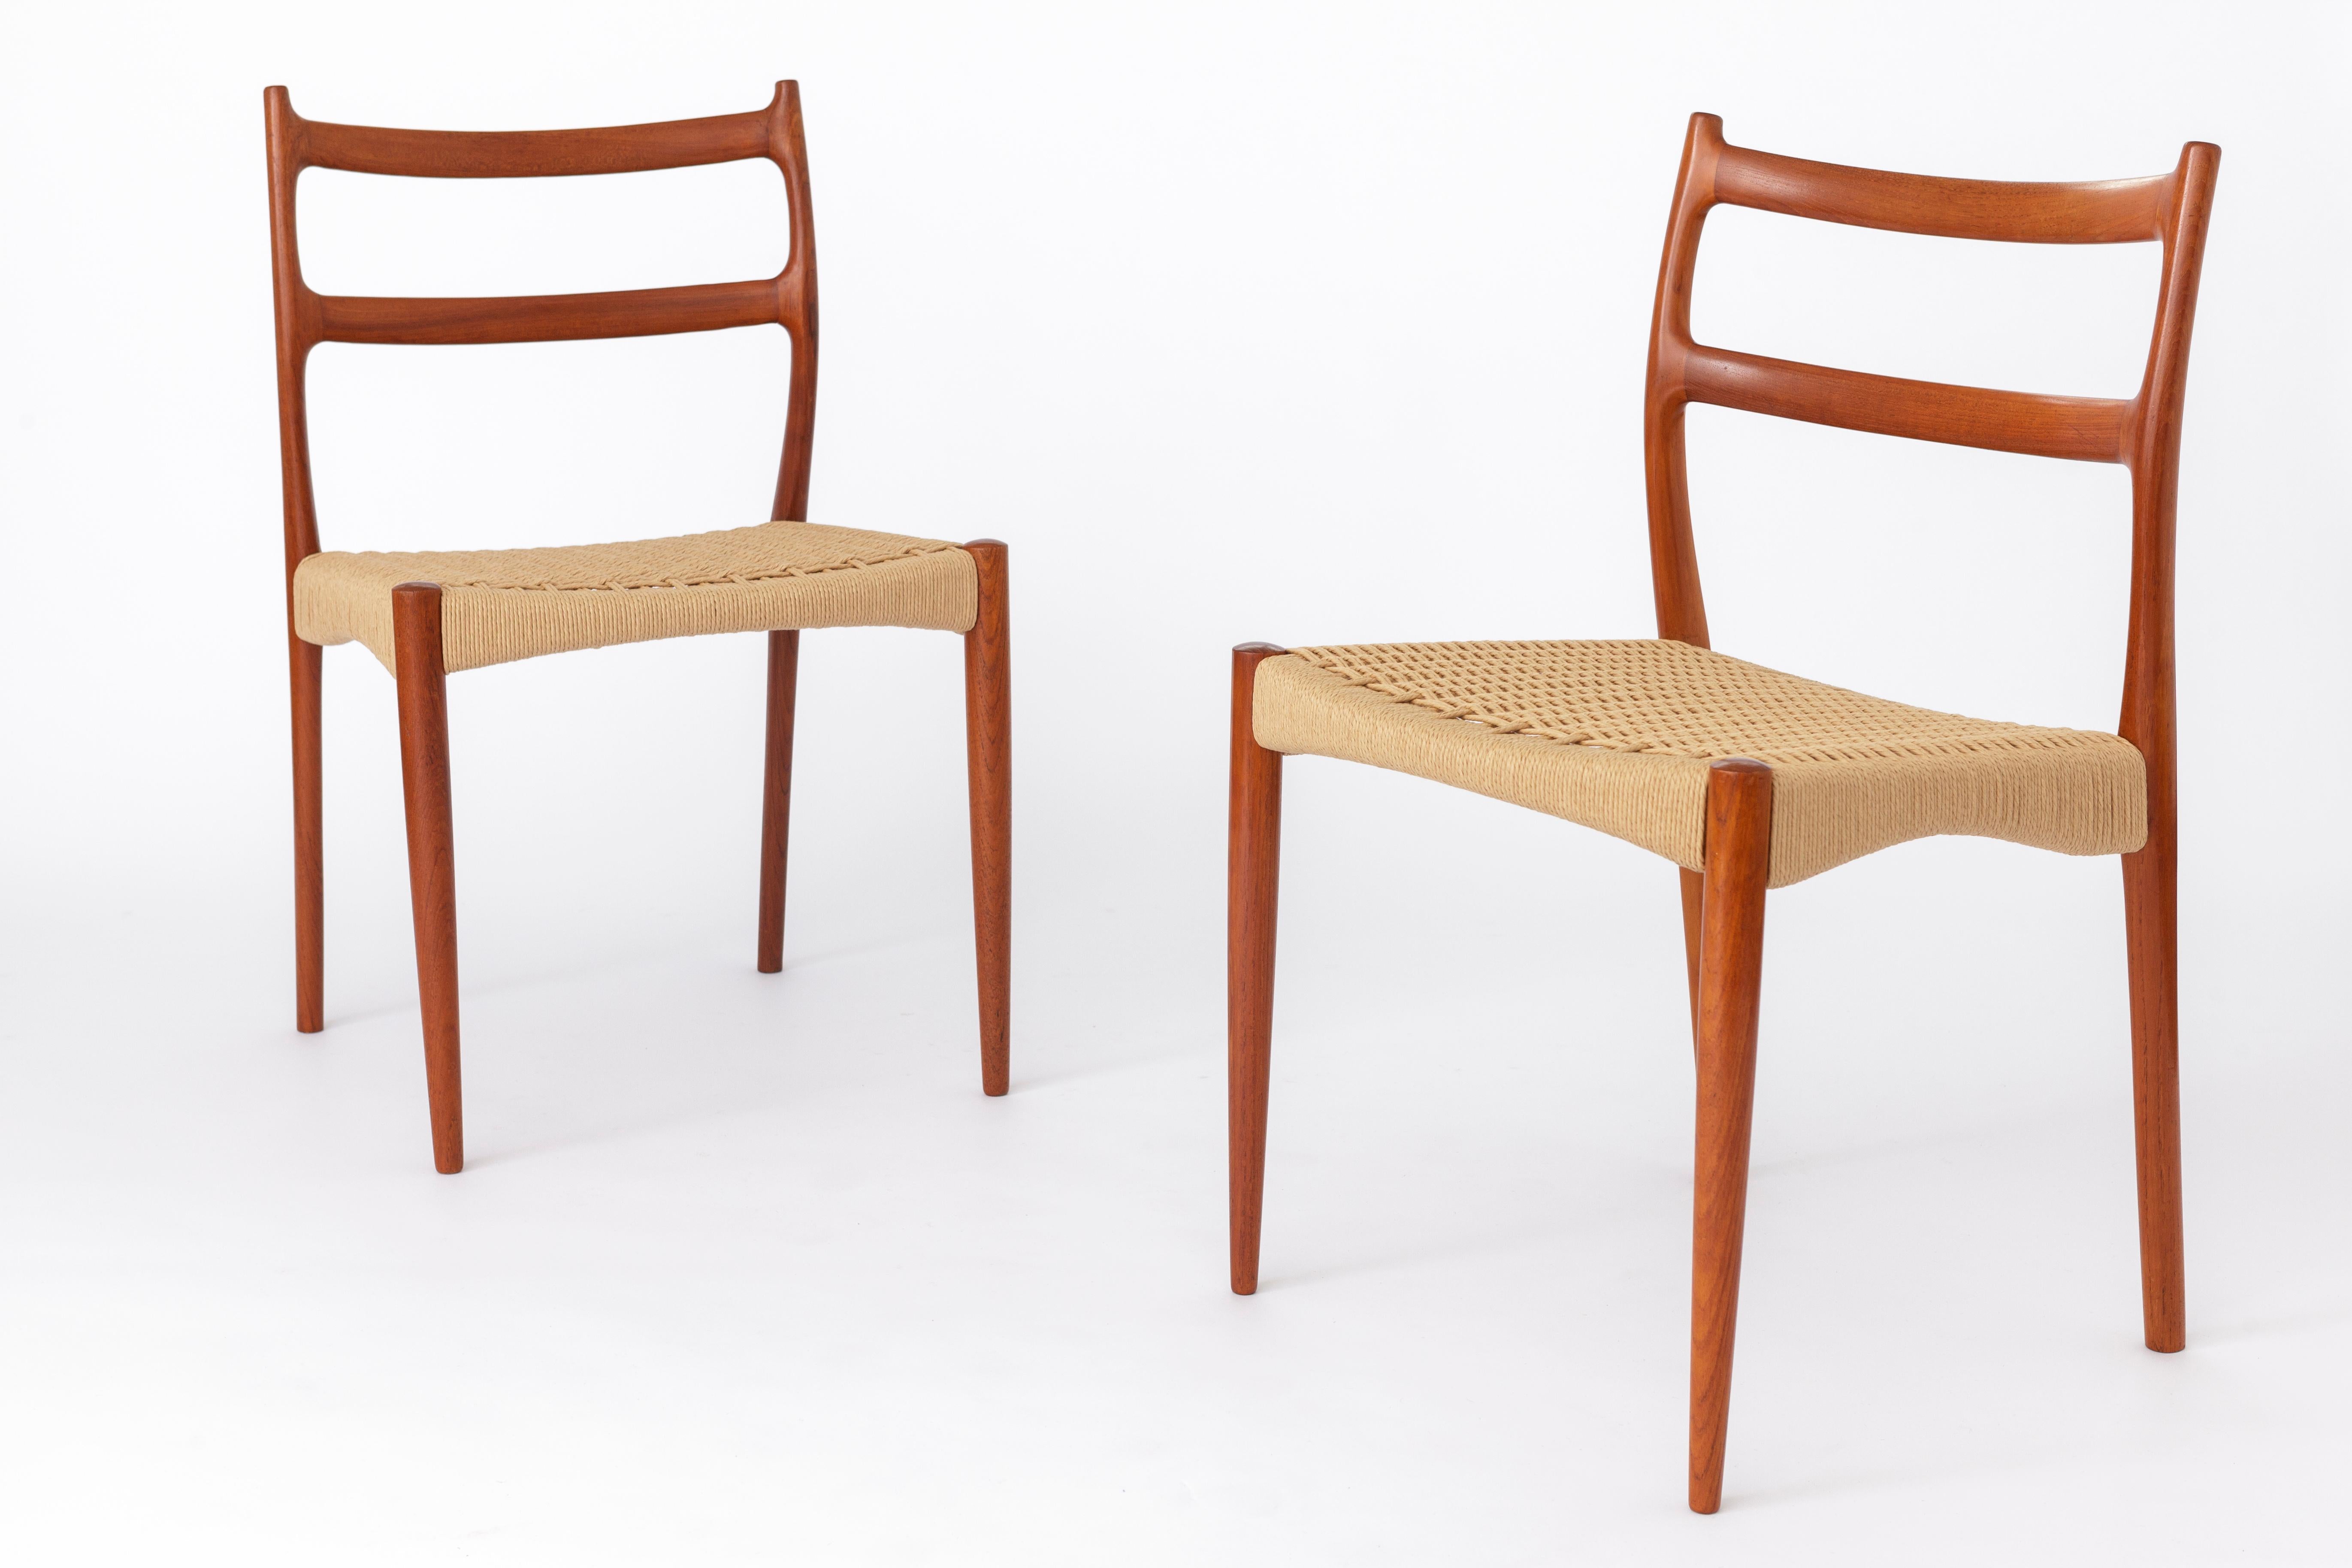 Teak 2 Søren Ladefoged chairs, teak, 1960s, papercord seat, dining chairs, set of 2 For Sale